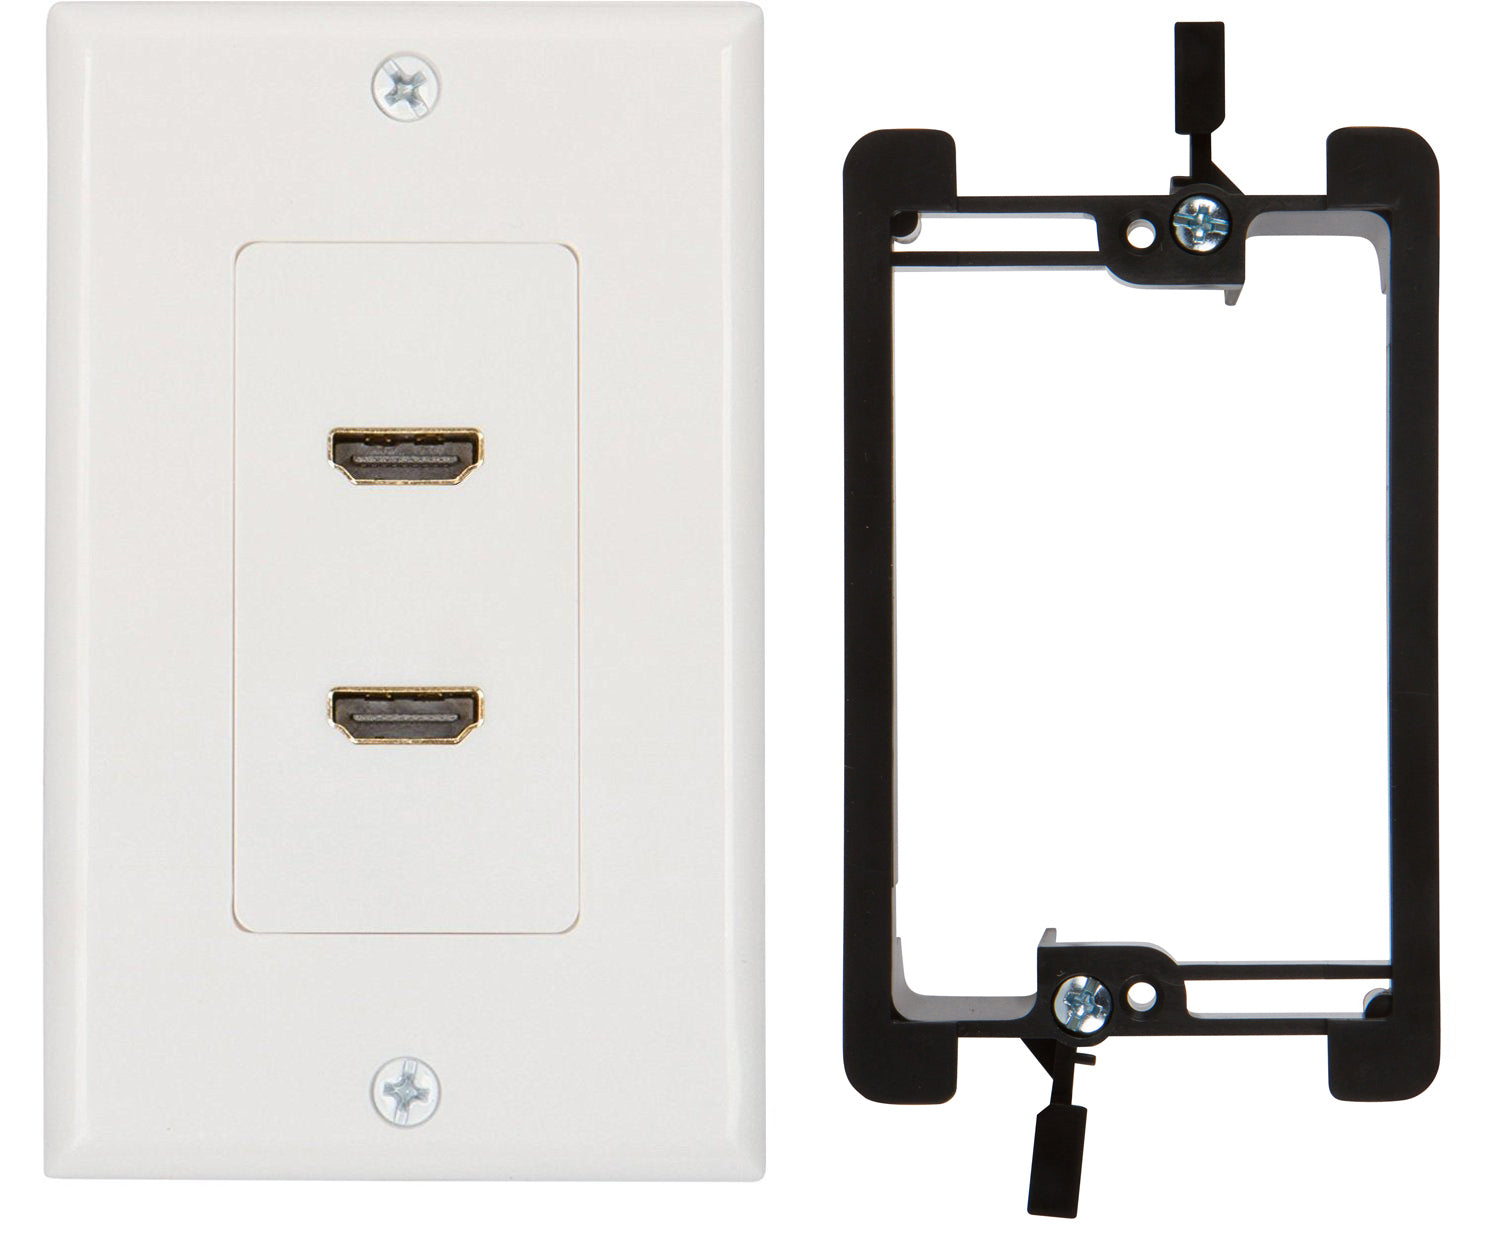 HDMI Wall Plate [UL Listed] (2 Port) Insert with 6-Inch Built-In Flexible Hi-Speed HDMI Cable (White) - Milena International Inc